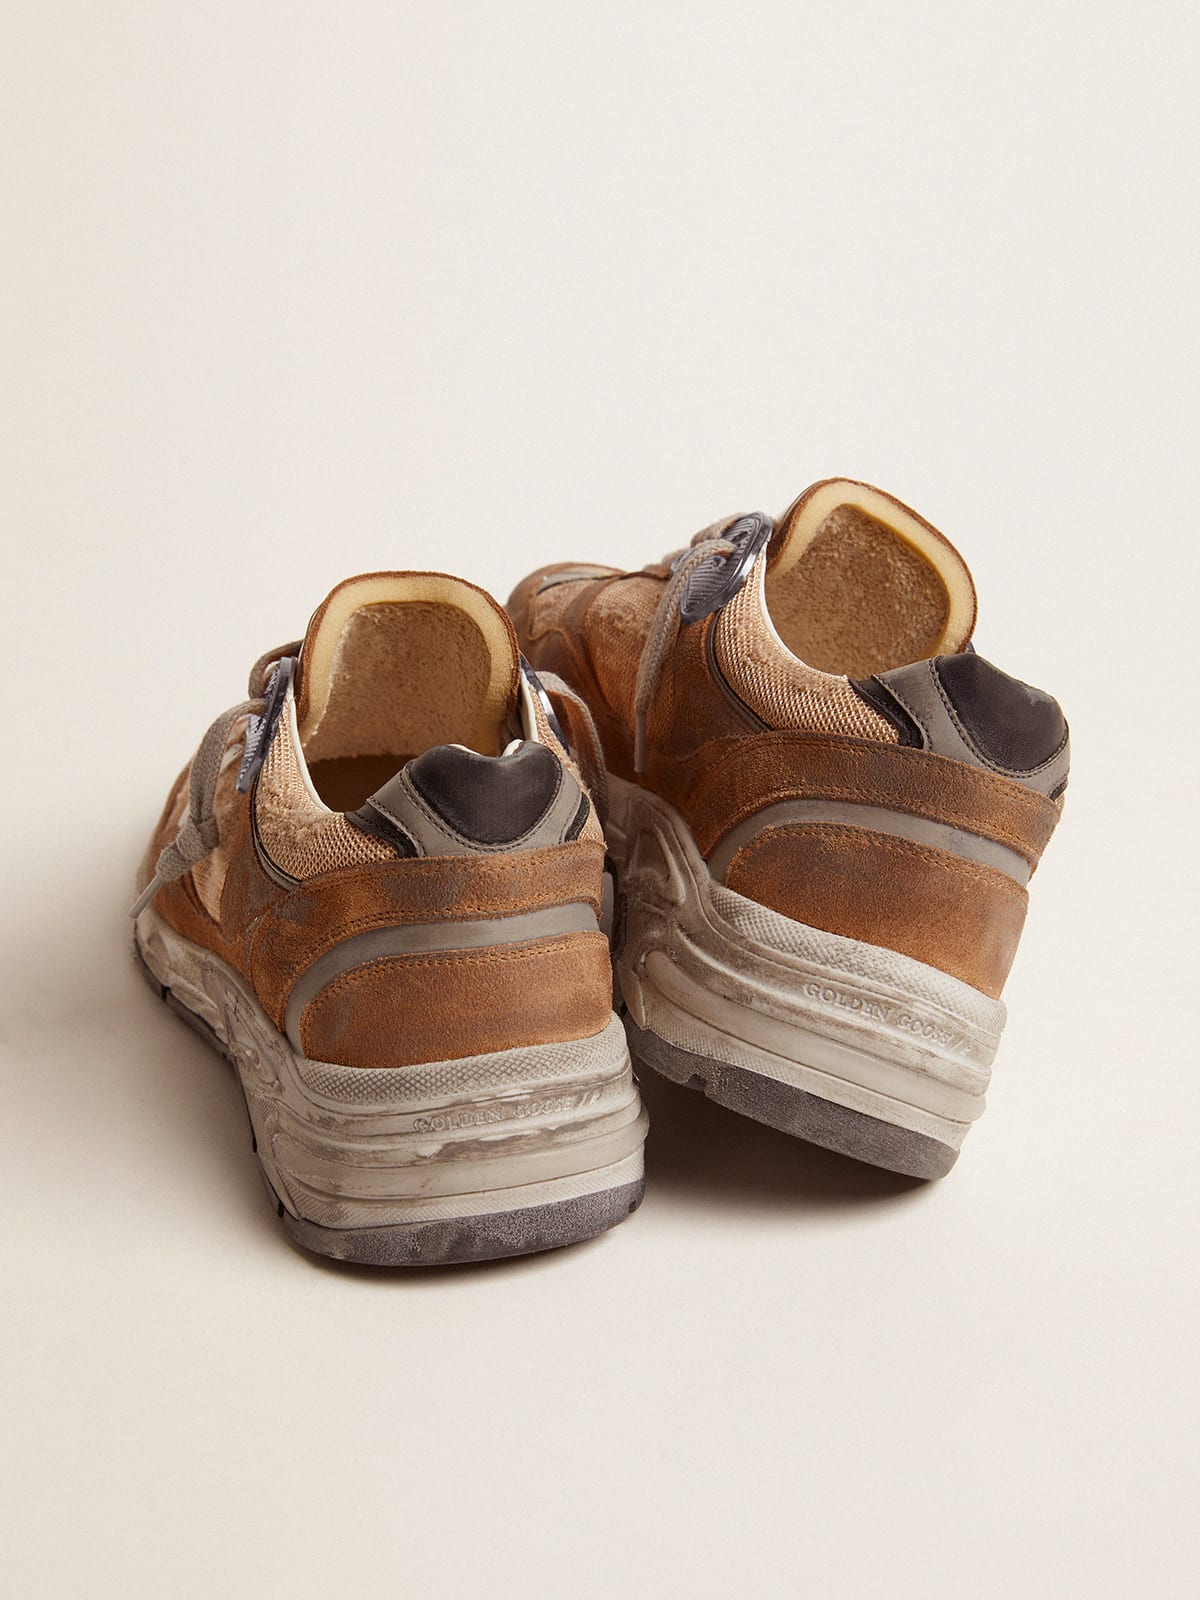 Golden Goose - Men's Dad-Star in tobacco-colored mesh and suede with white star in 